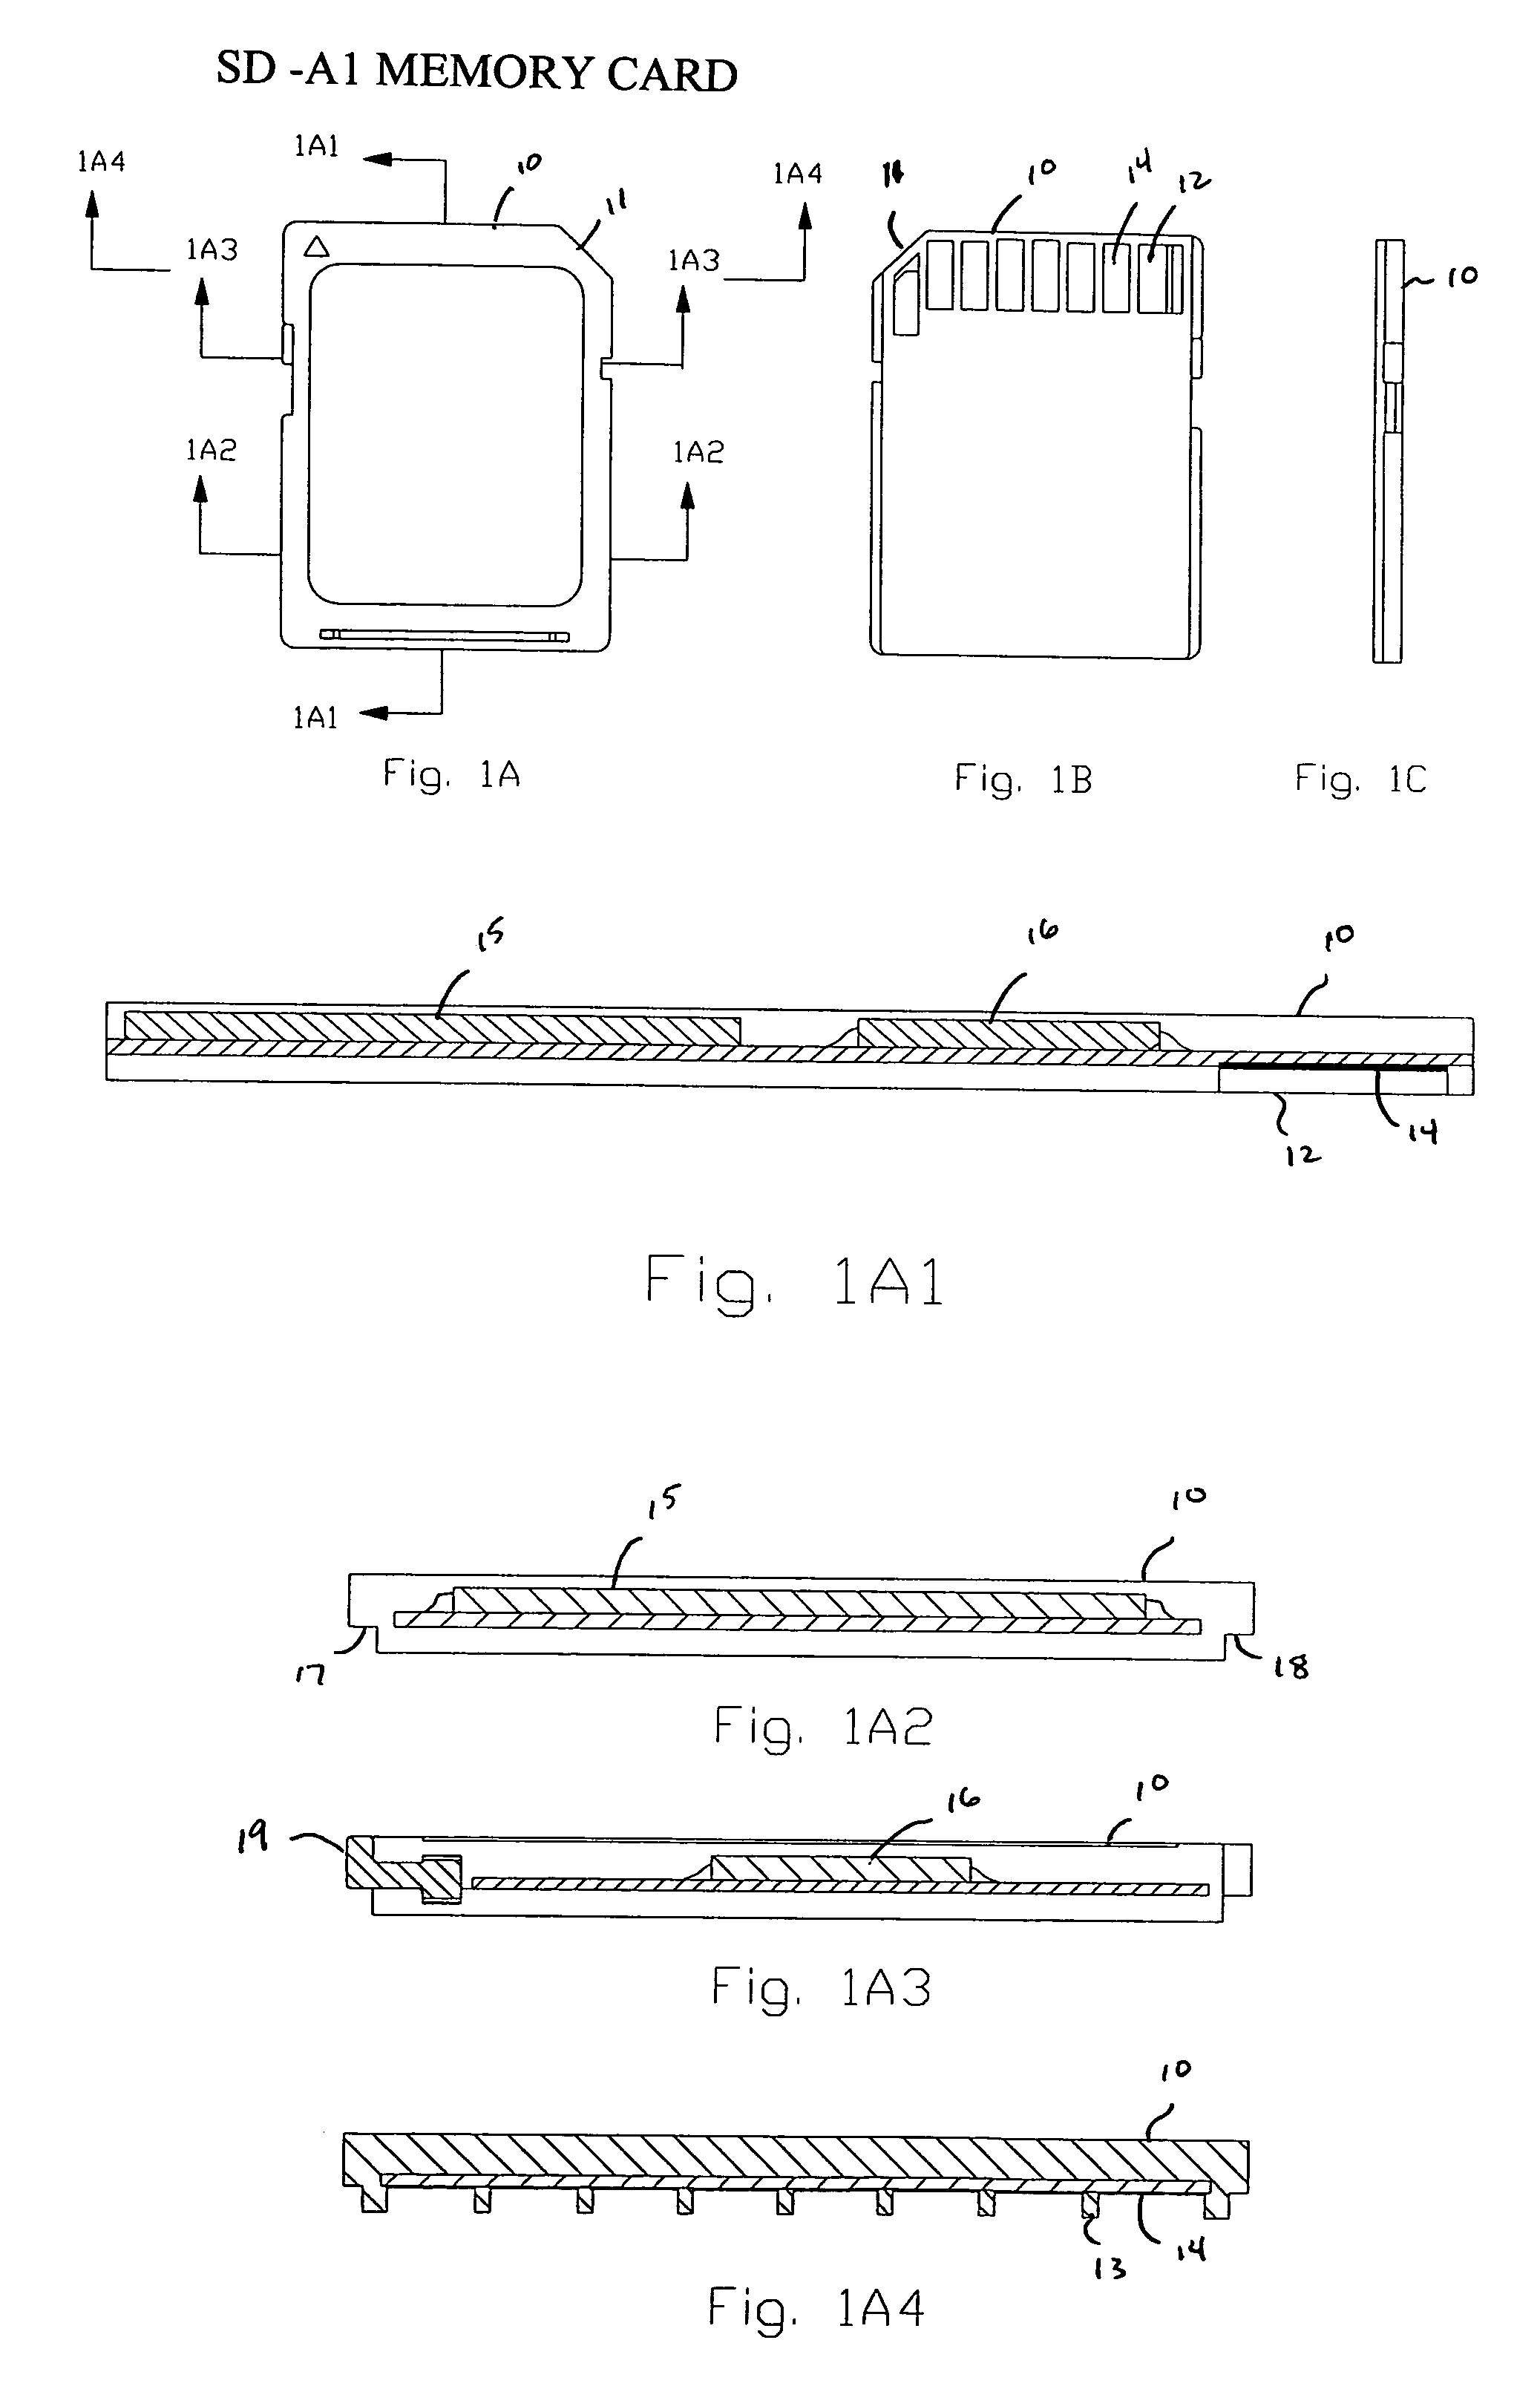 Removable flash integrated memory module card and method of manufacture